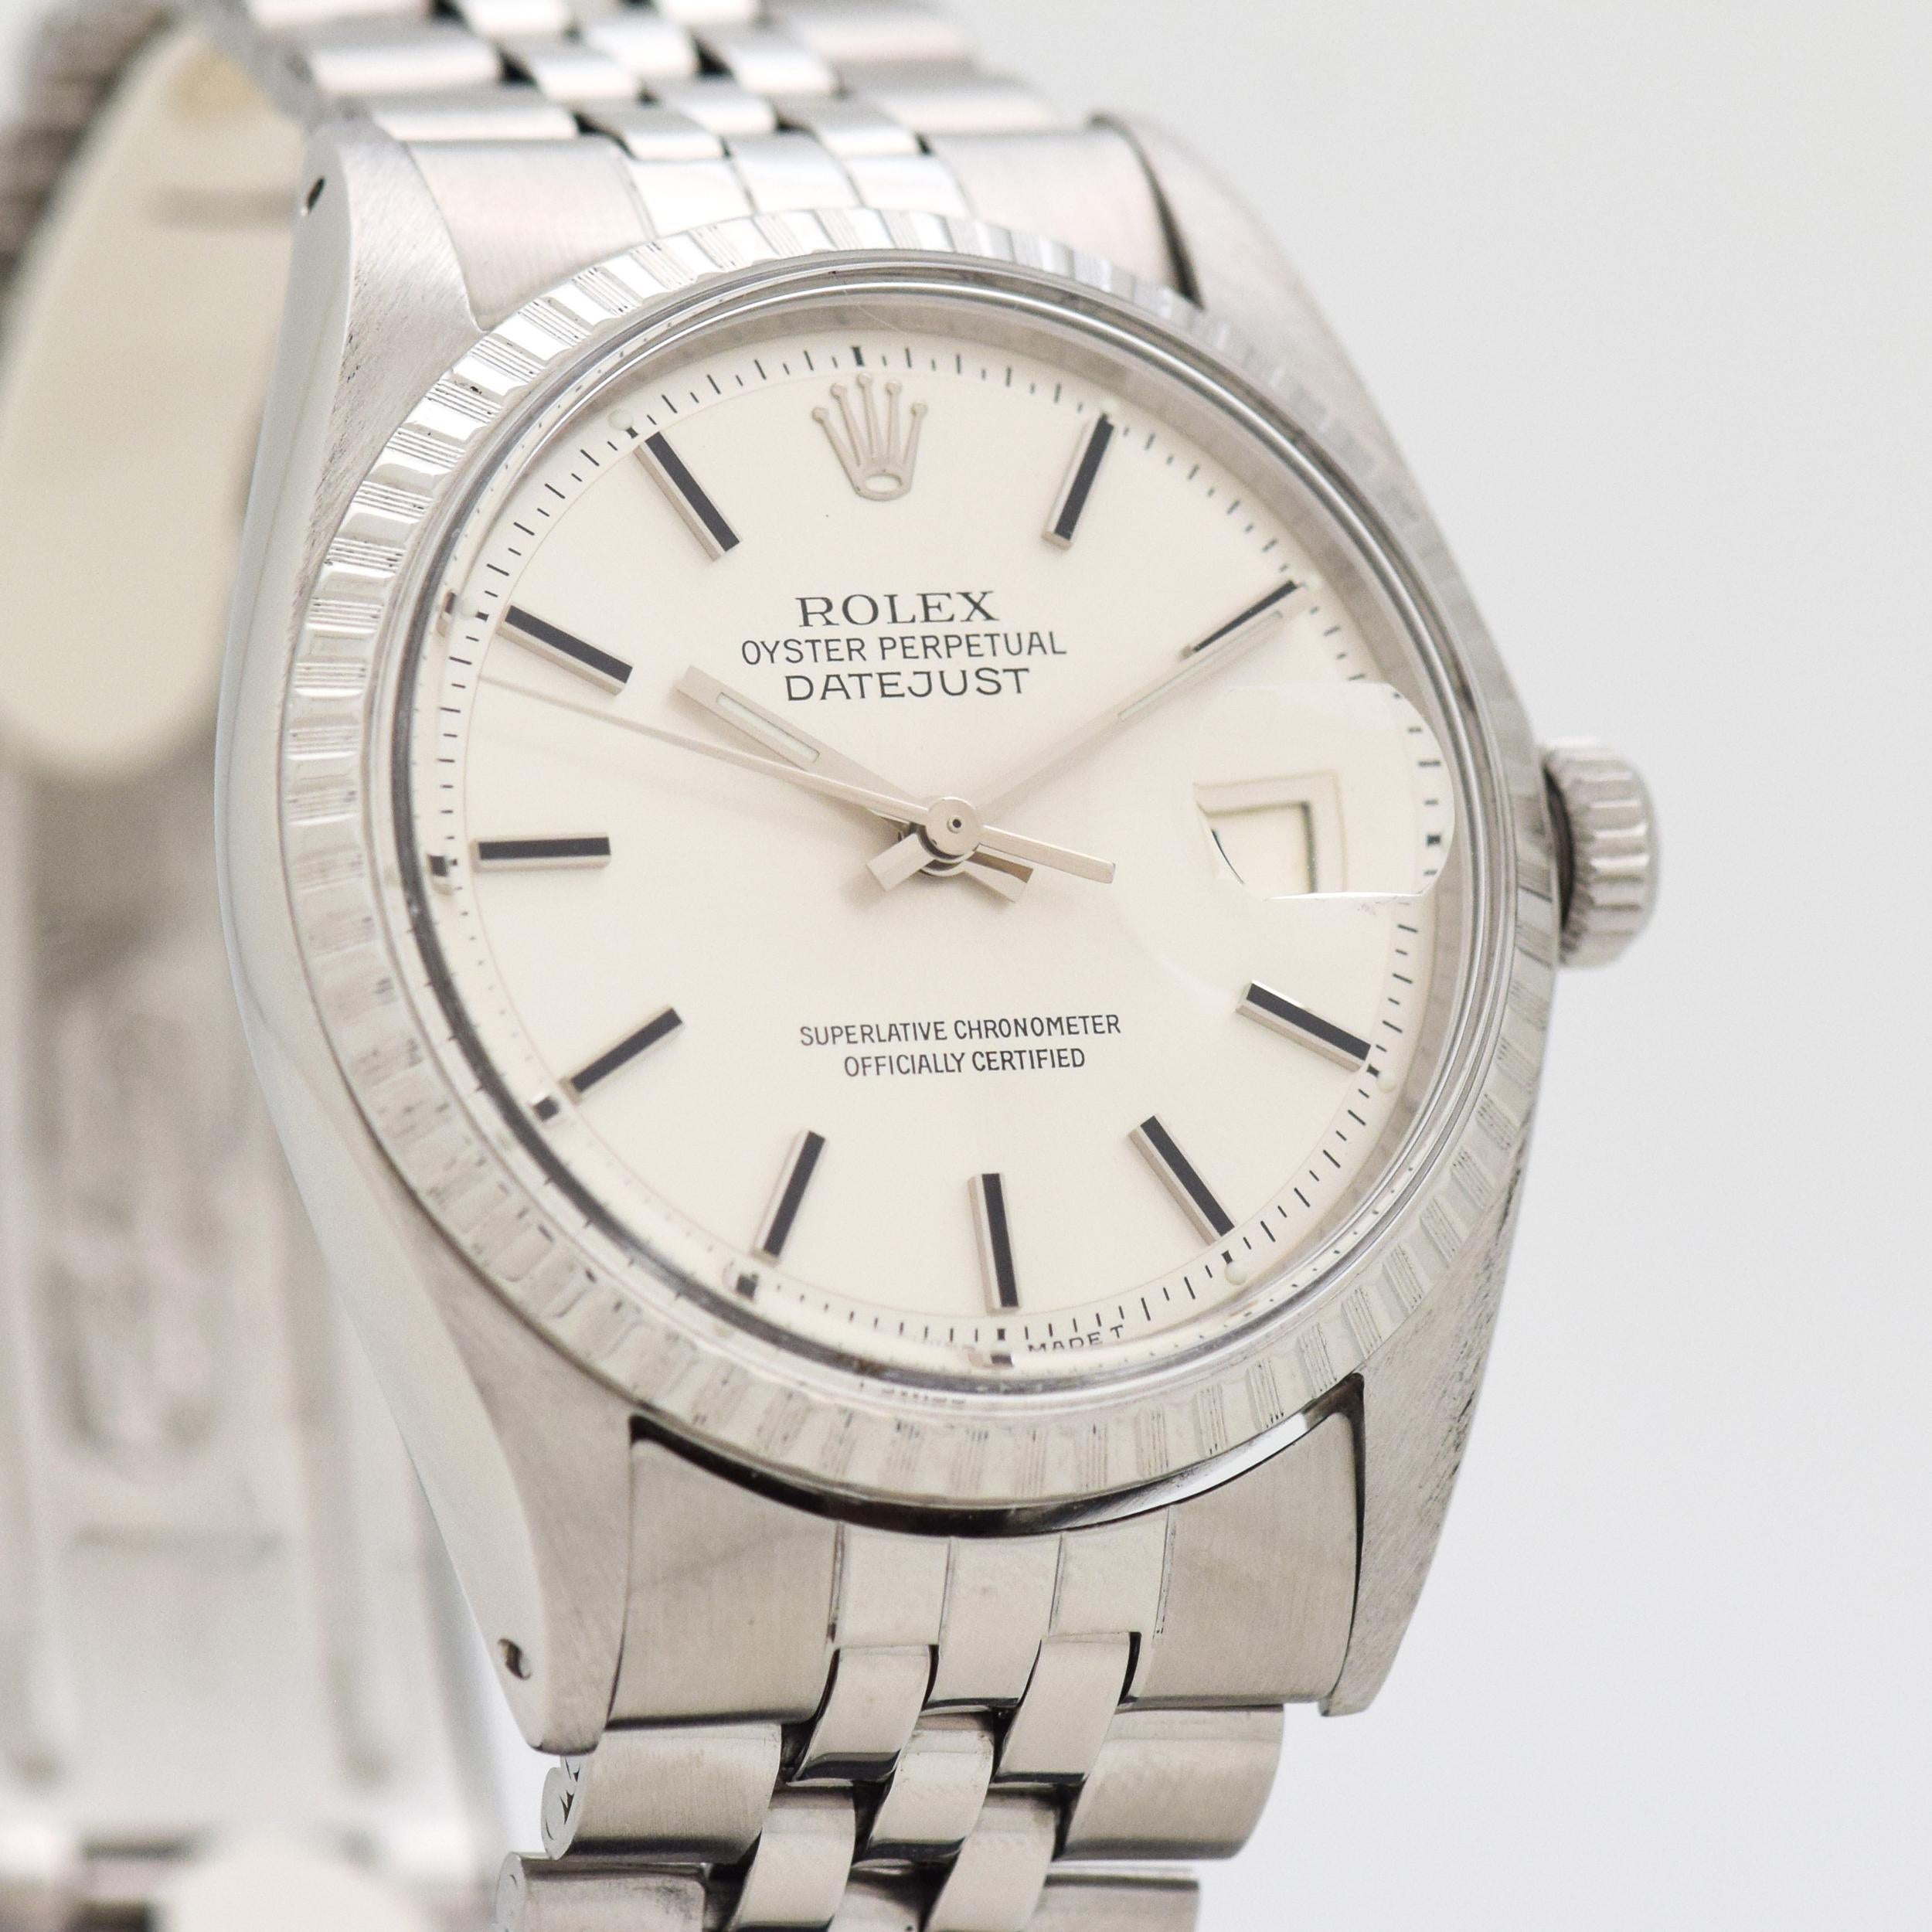 1968 Vintage Rolex Datejust Ref. 1603 Stainless Steel watch with Original Silver Dial with Applied Steel Stick/Bar/Baton Markers with Black Inlay with Original Rolex Stainless Steel Jubilee Bracelet. 36mm x 43mm lug to lug (1.42 in. x 1.69 in.) -